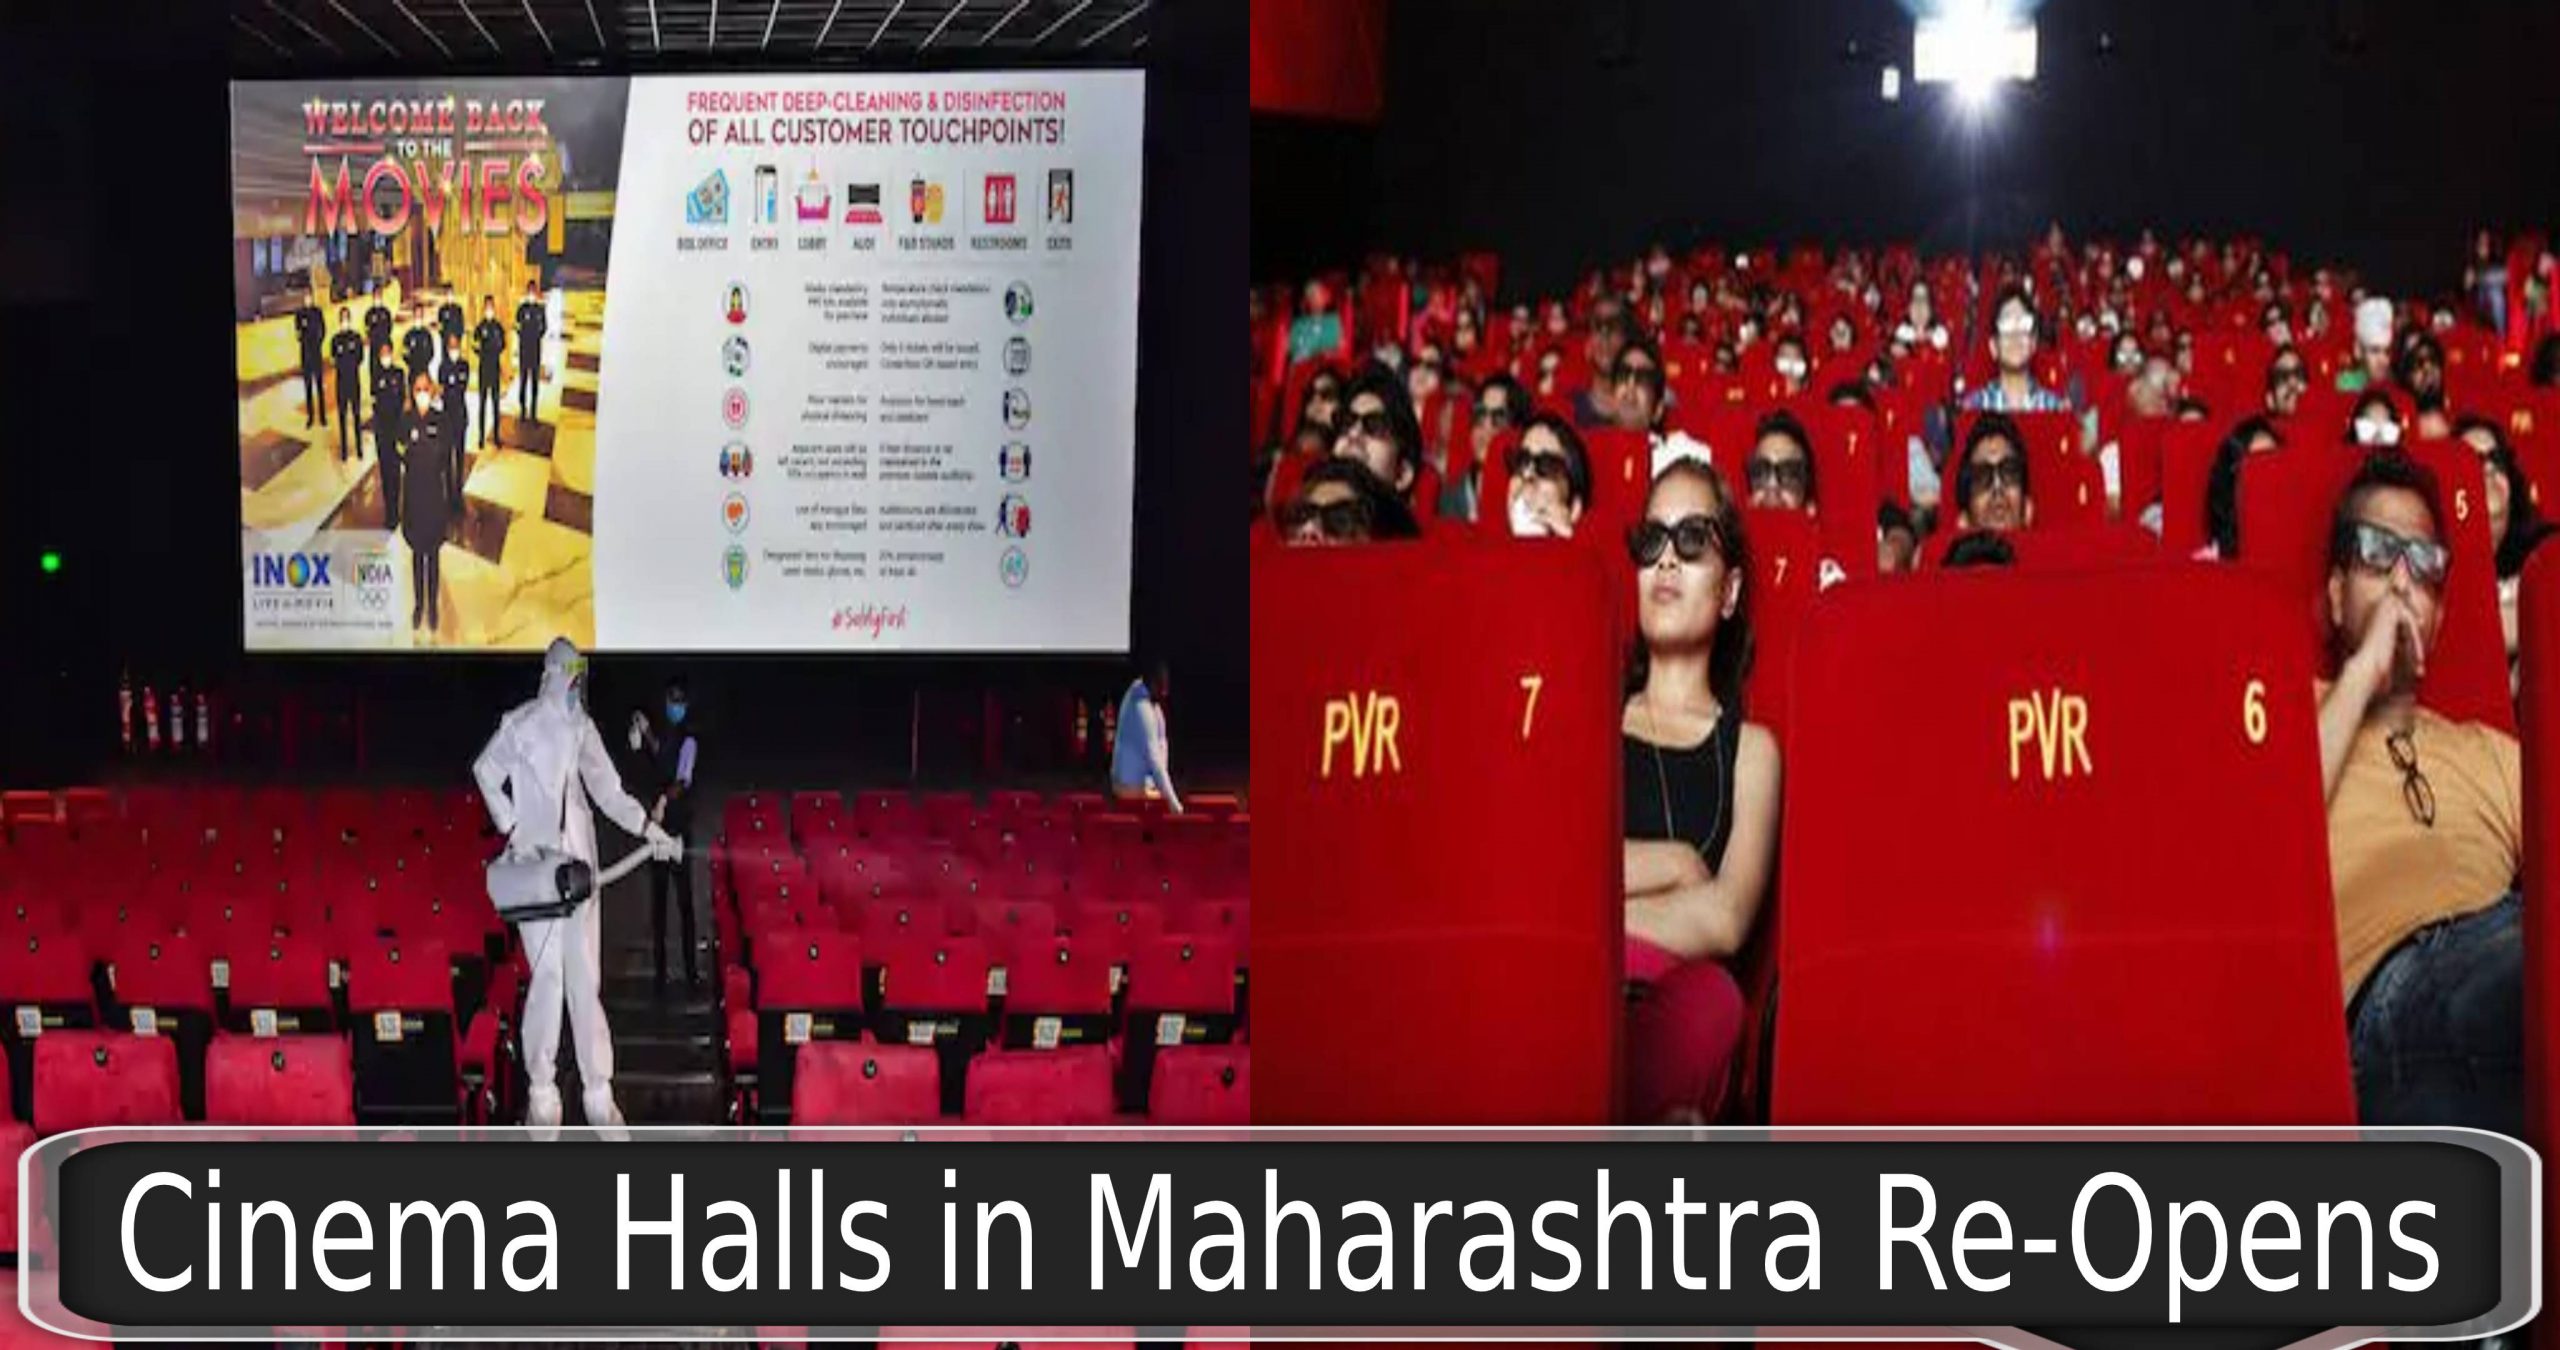 Cinema Halls in Maharashtra Re-Opens from today | PVR, Inox Leisure Shares Soars  